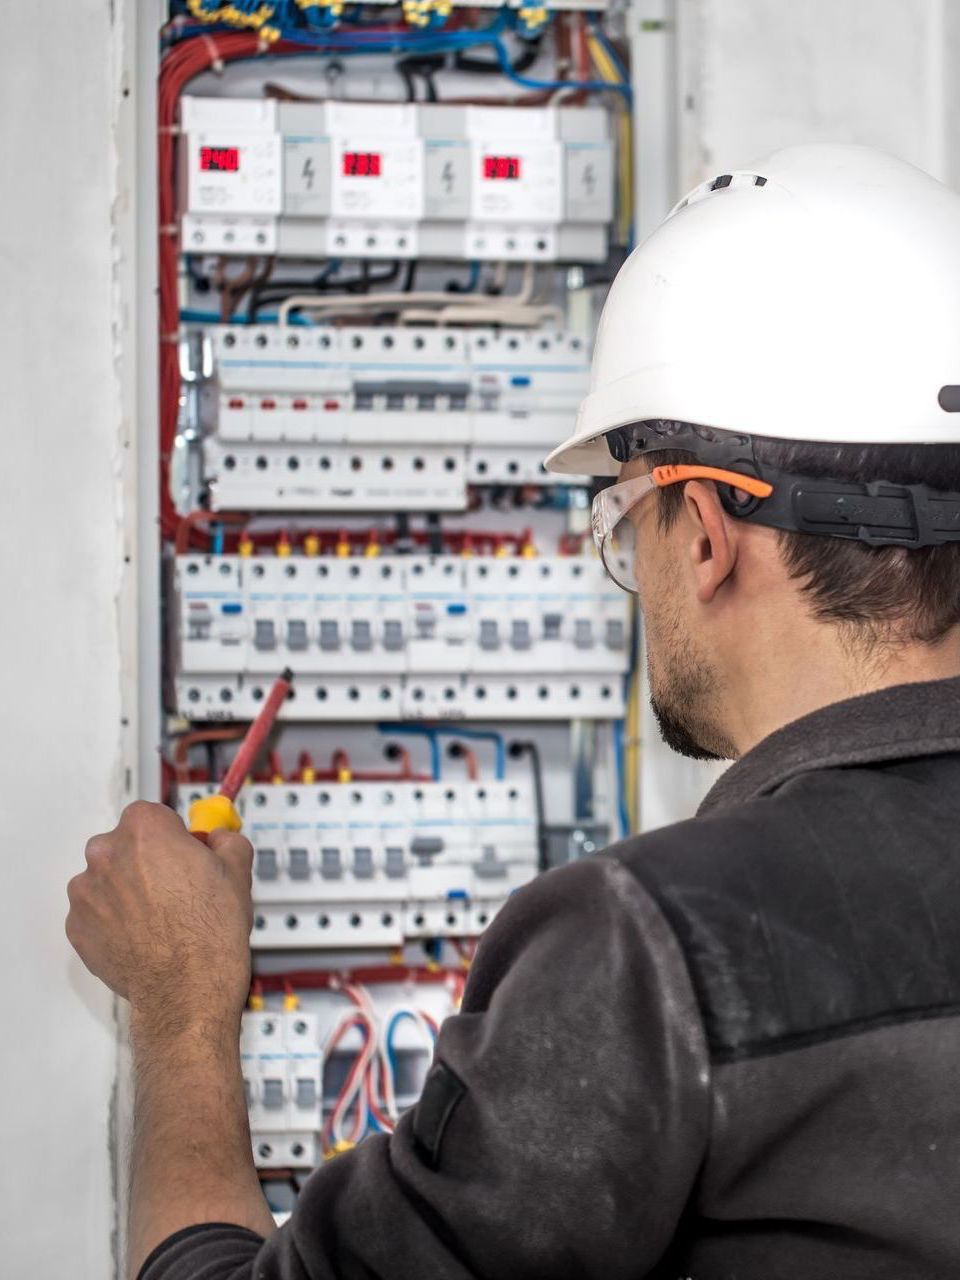 a man wearing a hard hat is working on a circuit board